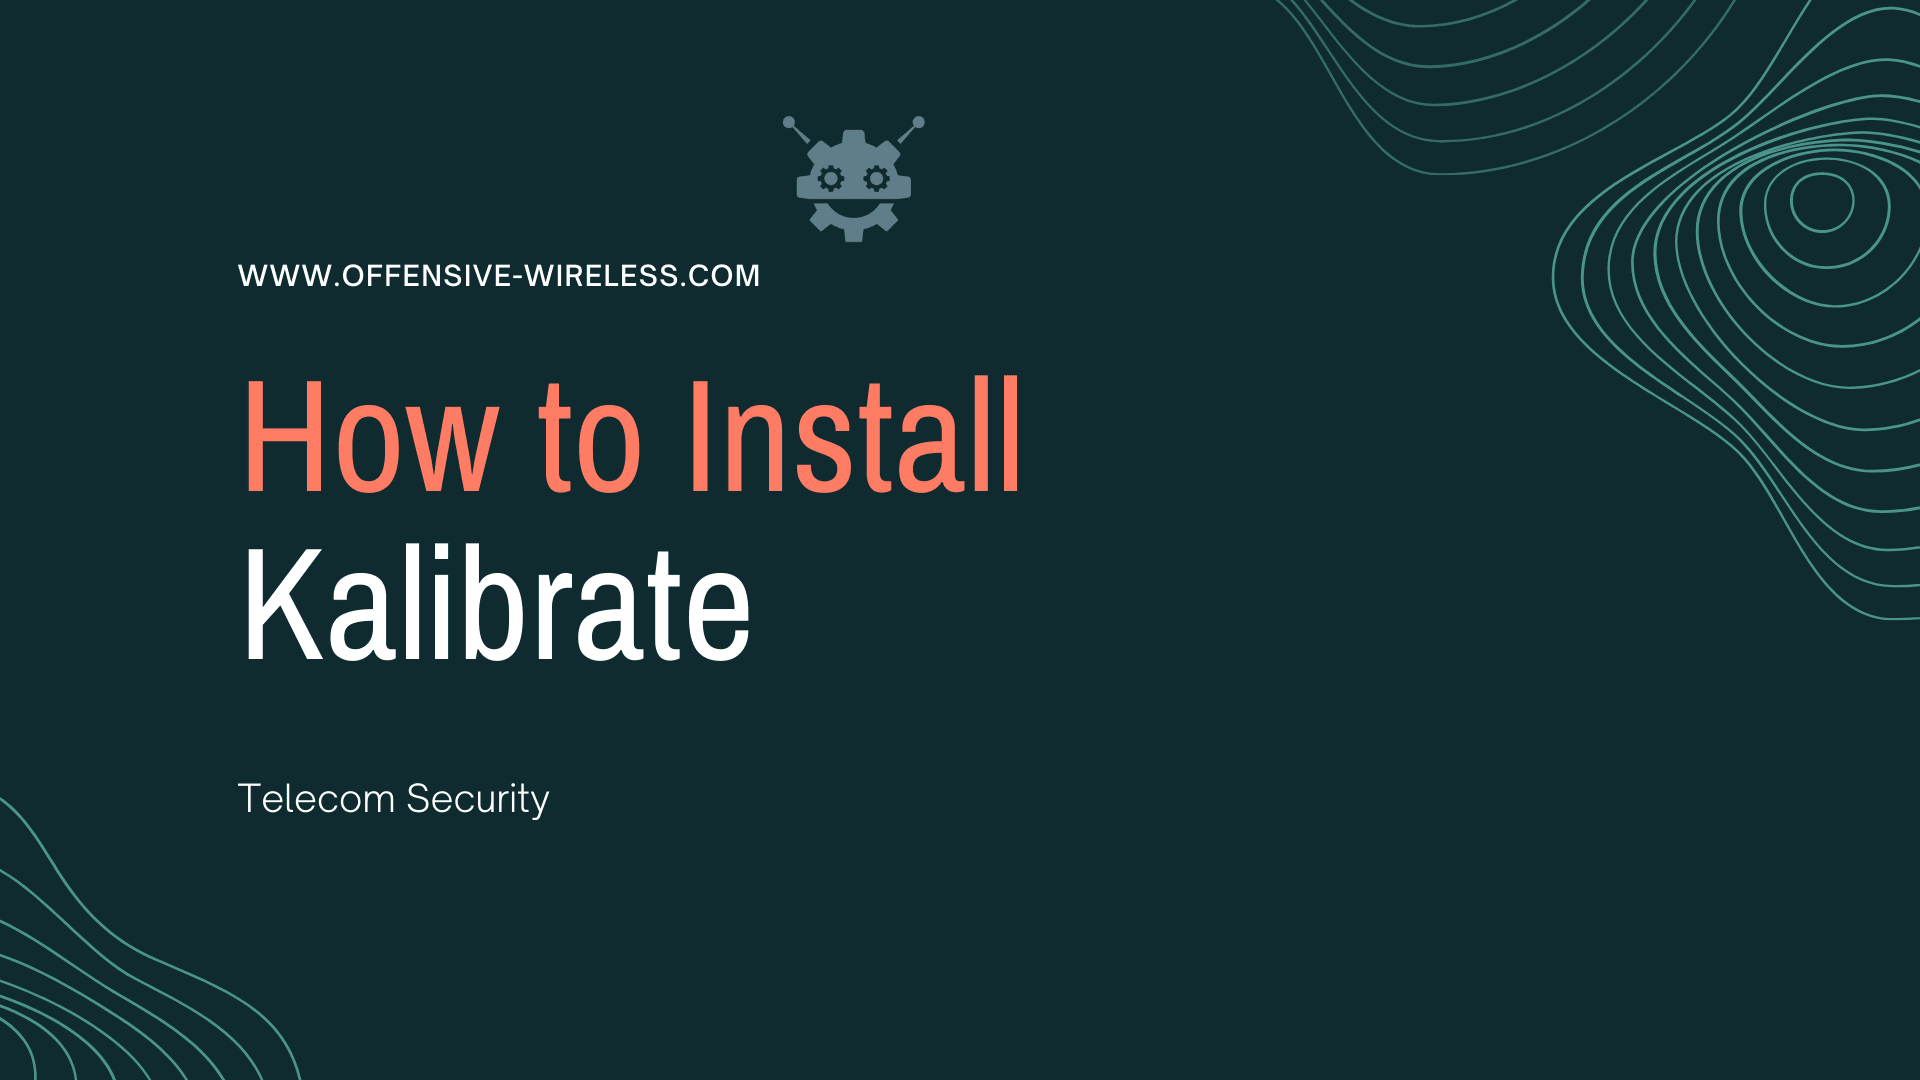 How to Install Kalibrate